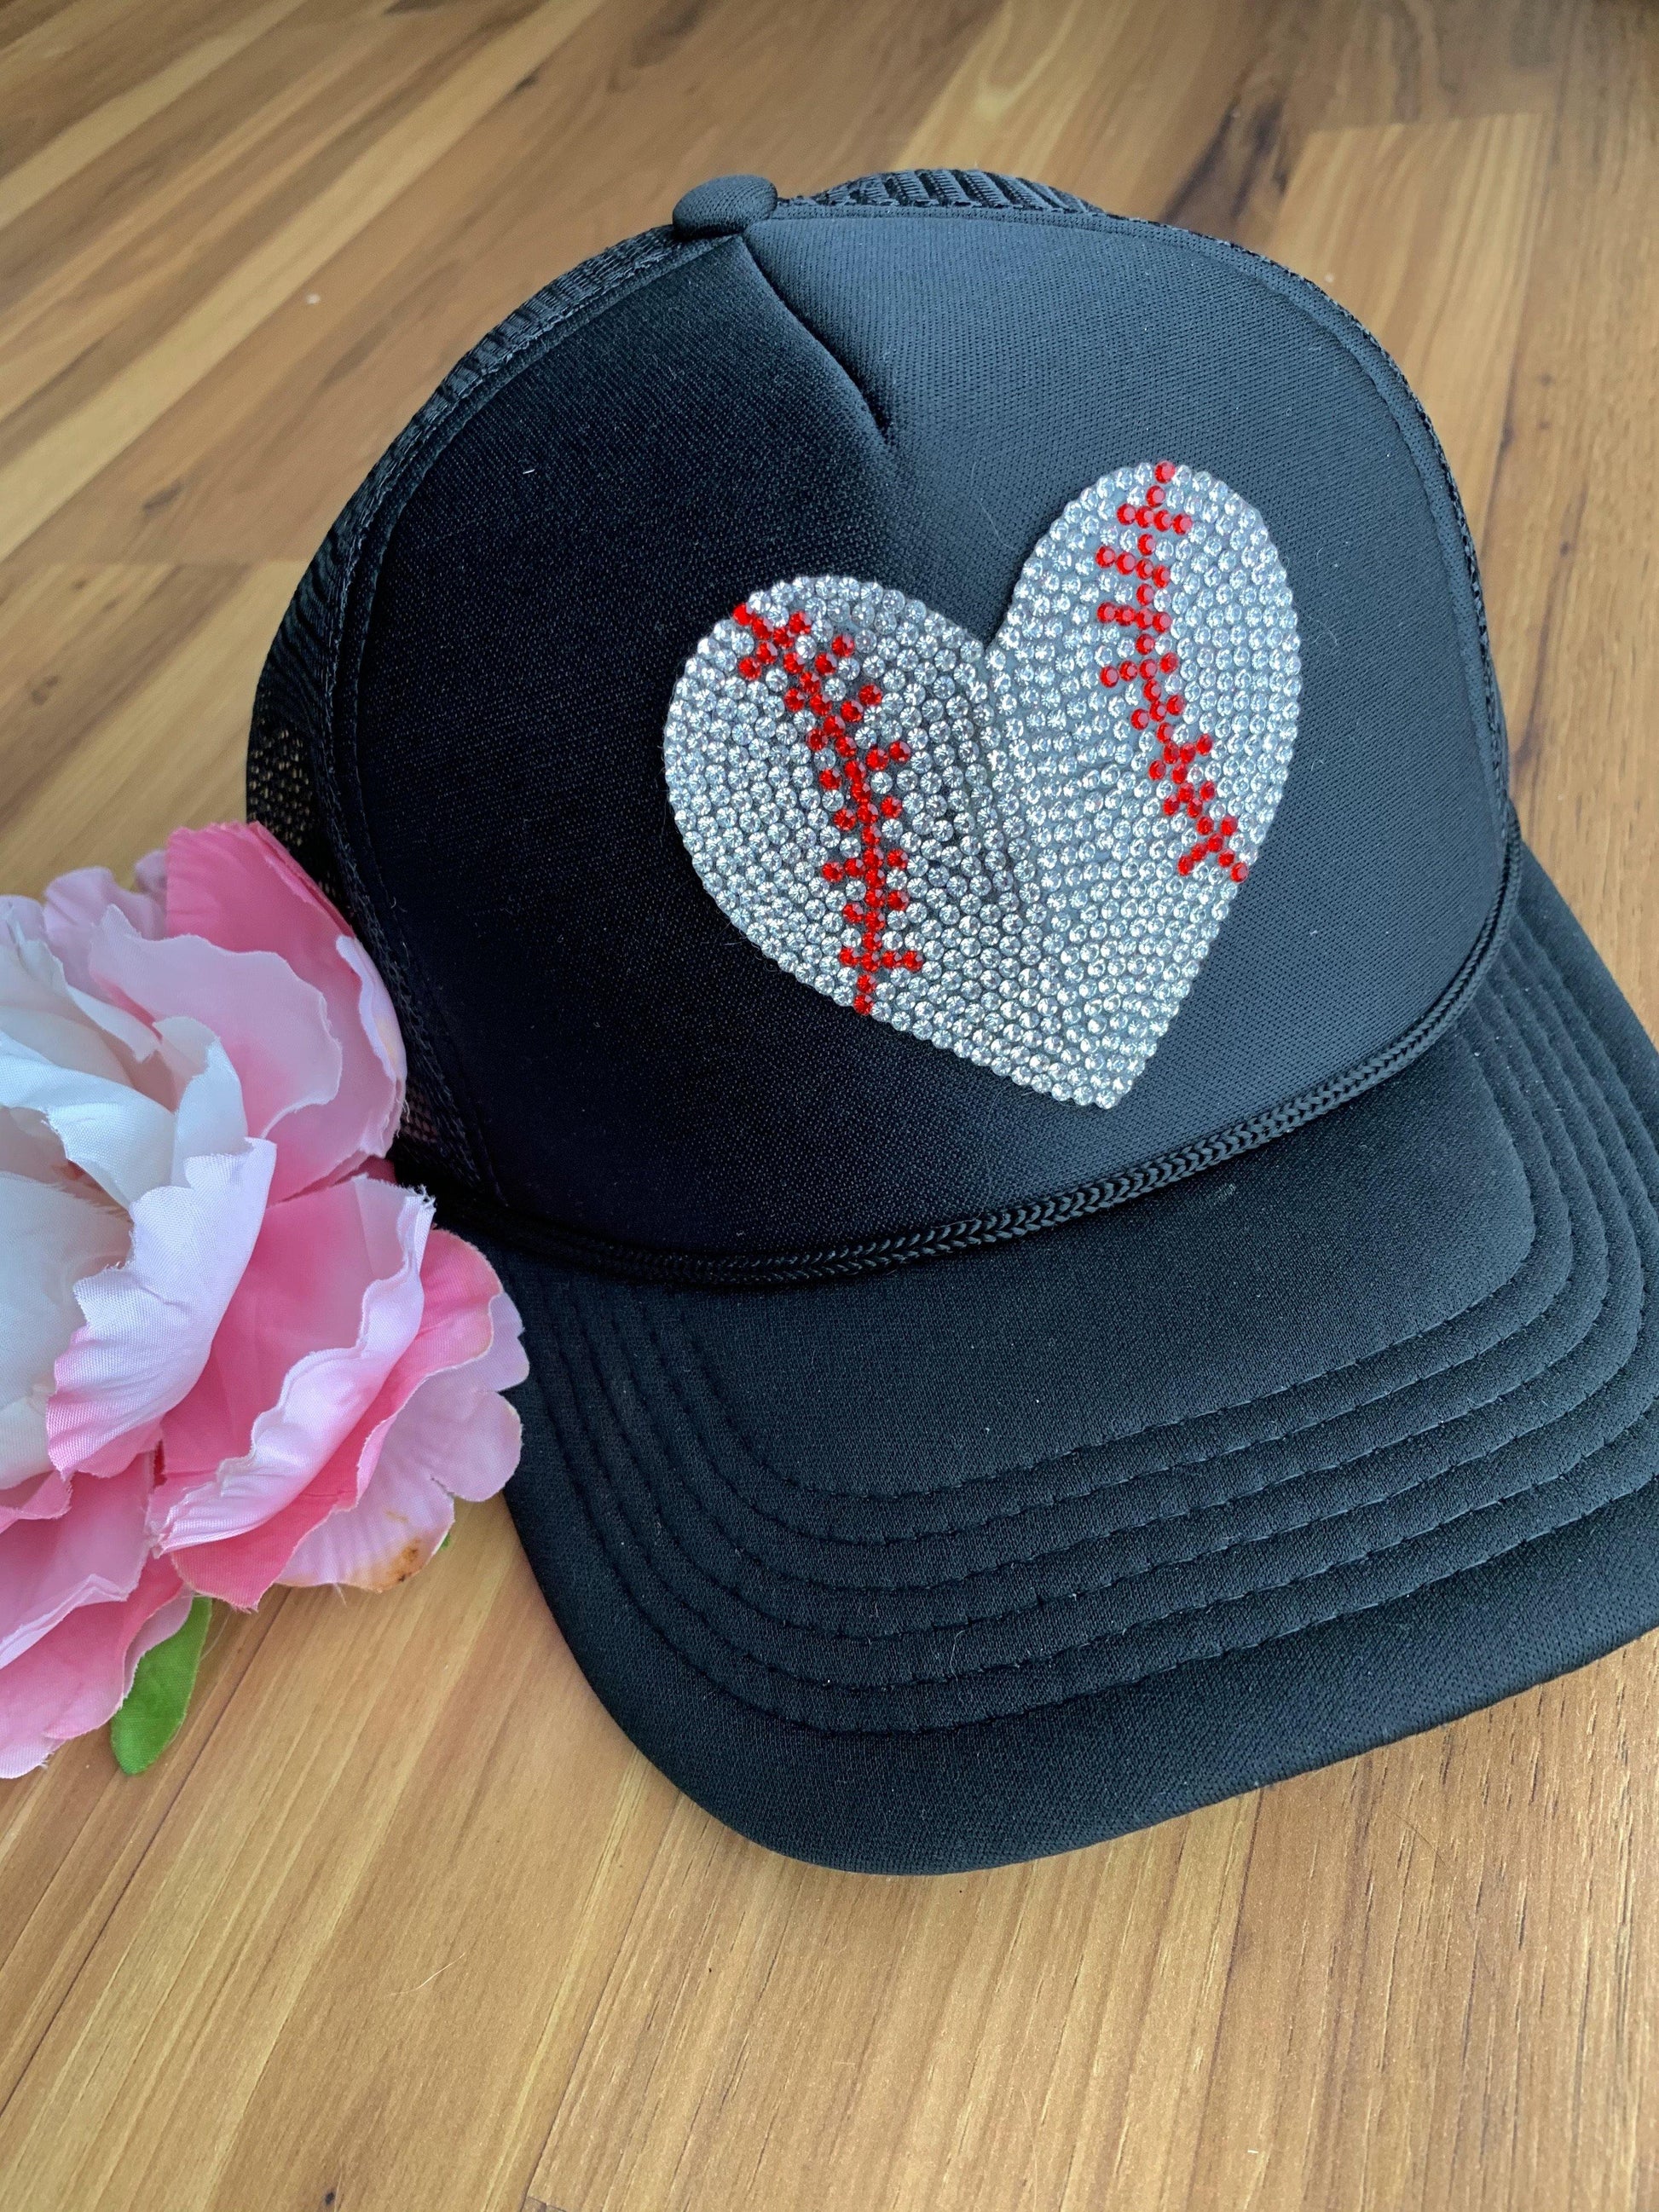 Bling baseball hats! Trucker • Adjustable snapback - Stacy's Pink Martini Boutique